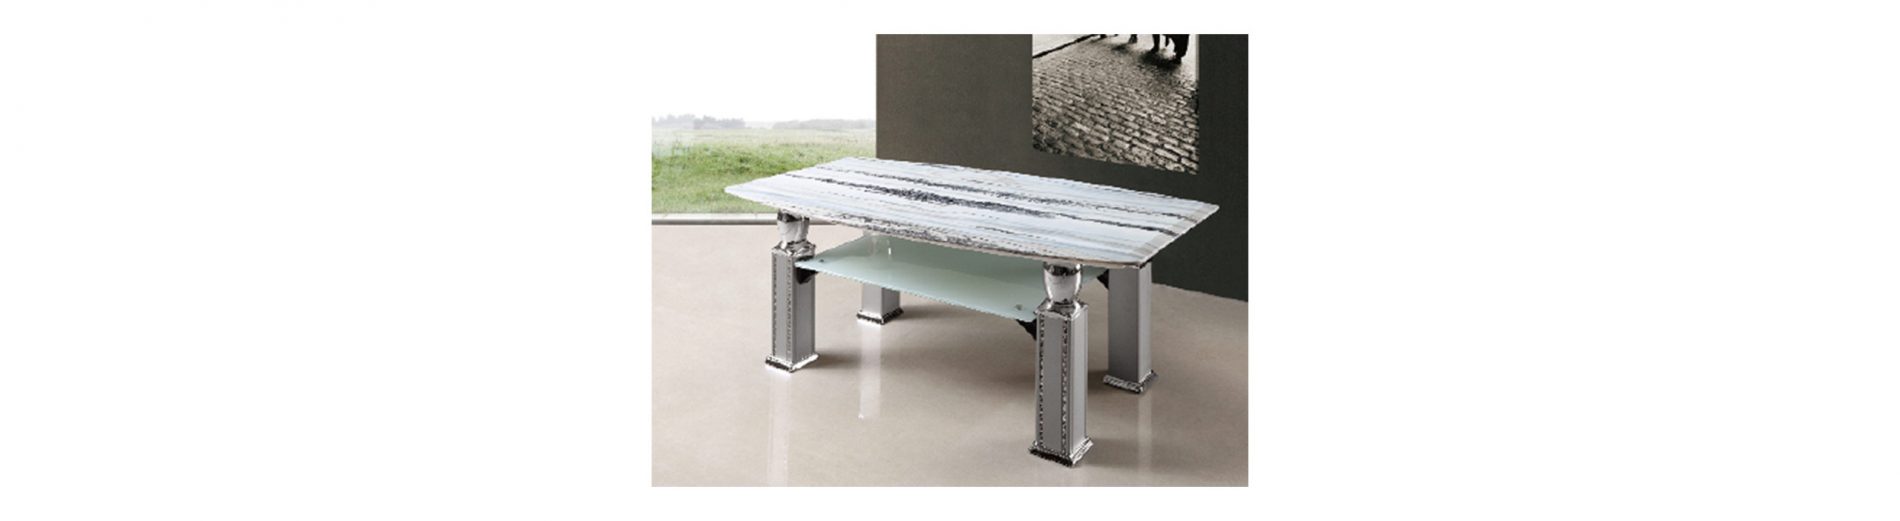 Get Coffee Tables With Granite Tops To Add Style To Your Home